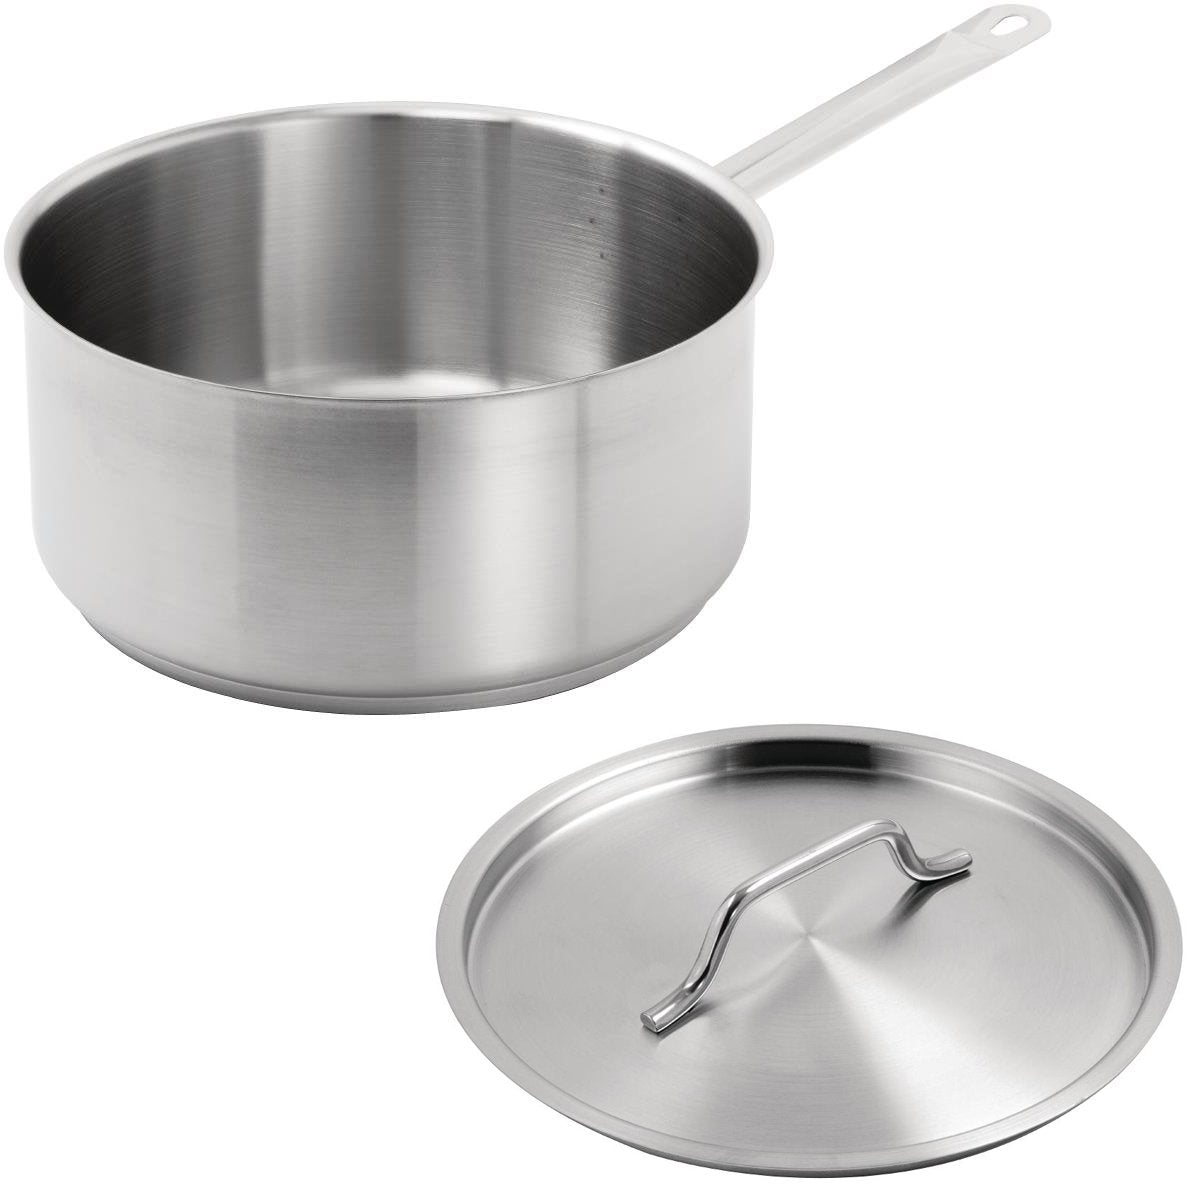 Professional Saucepan with Lid Stainless steel 1.3 litres Rental